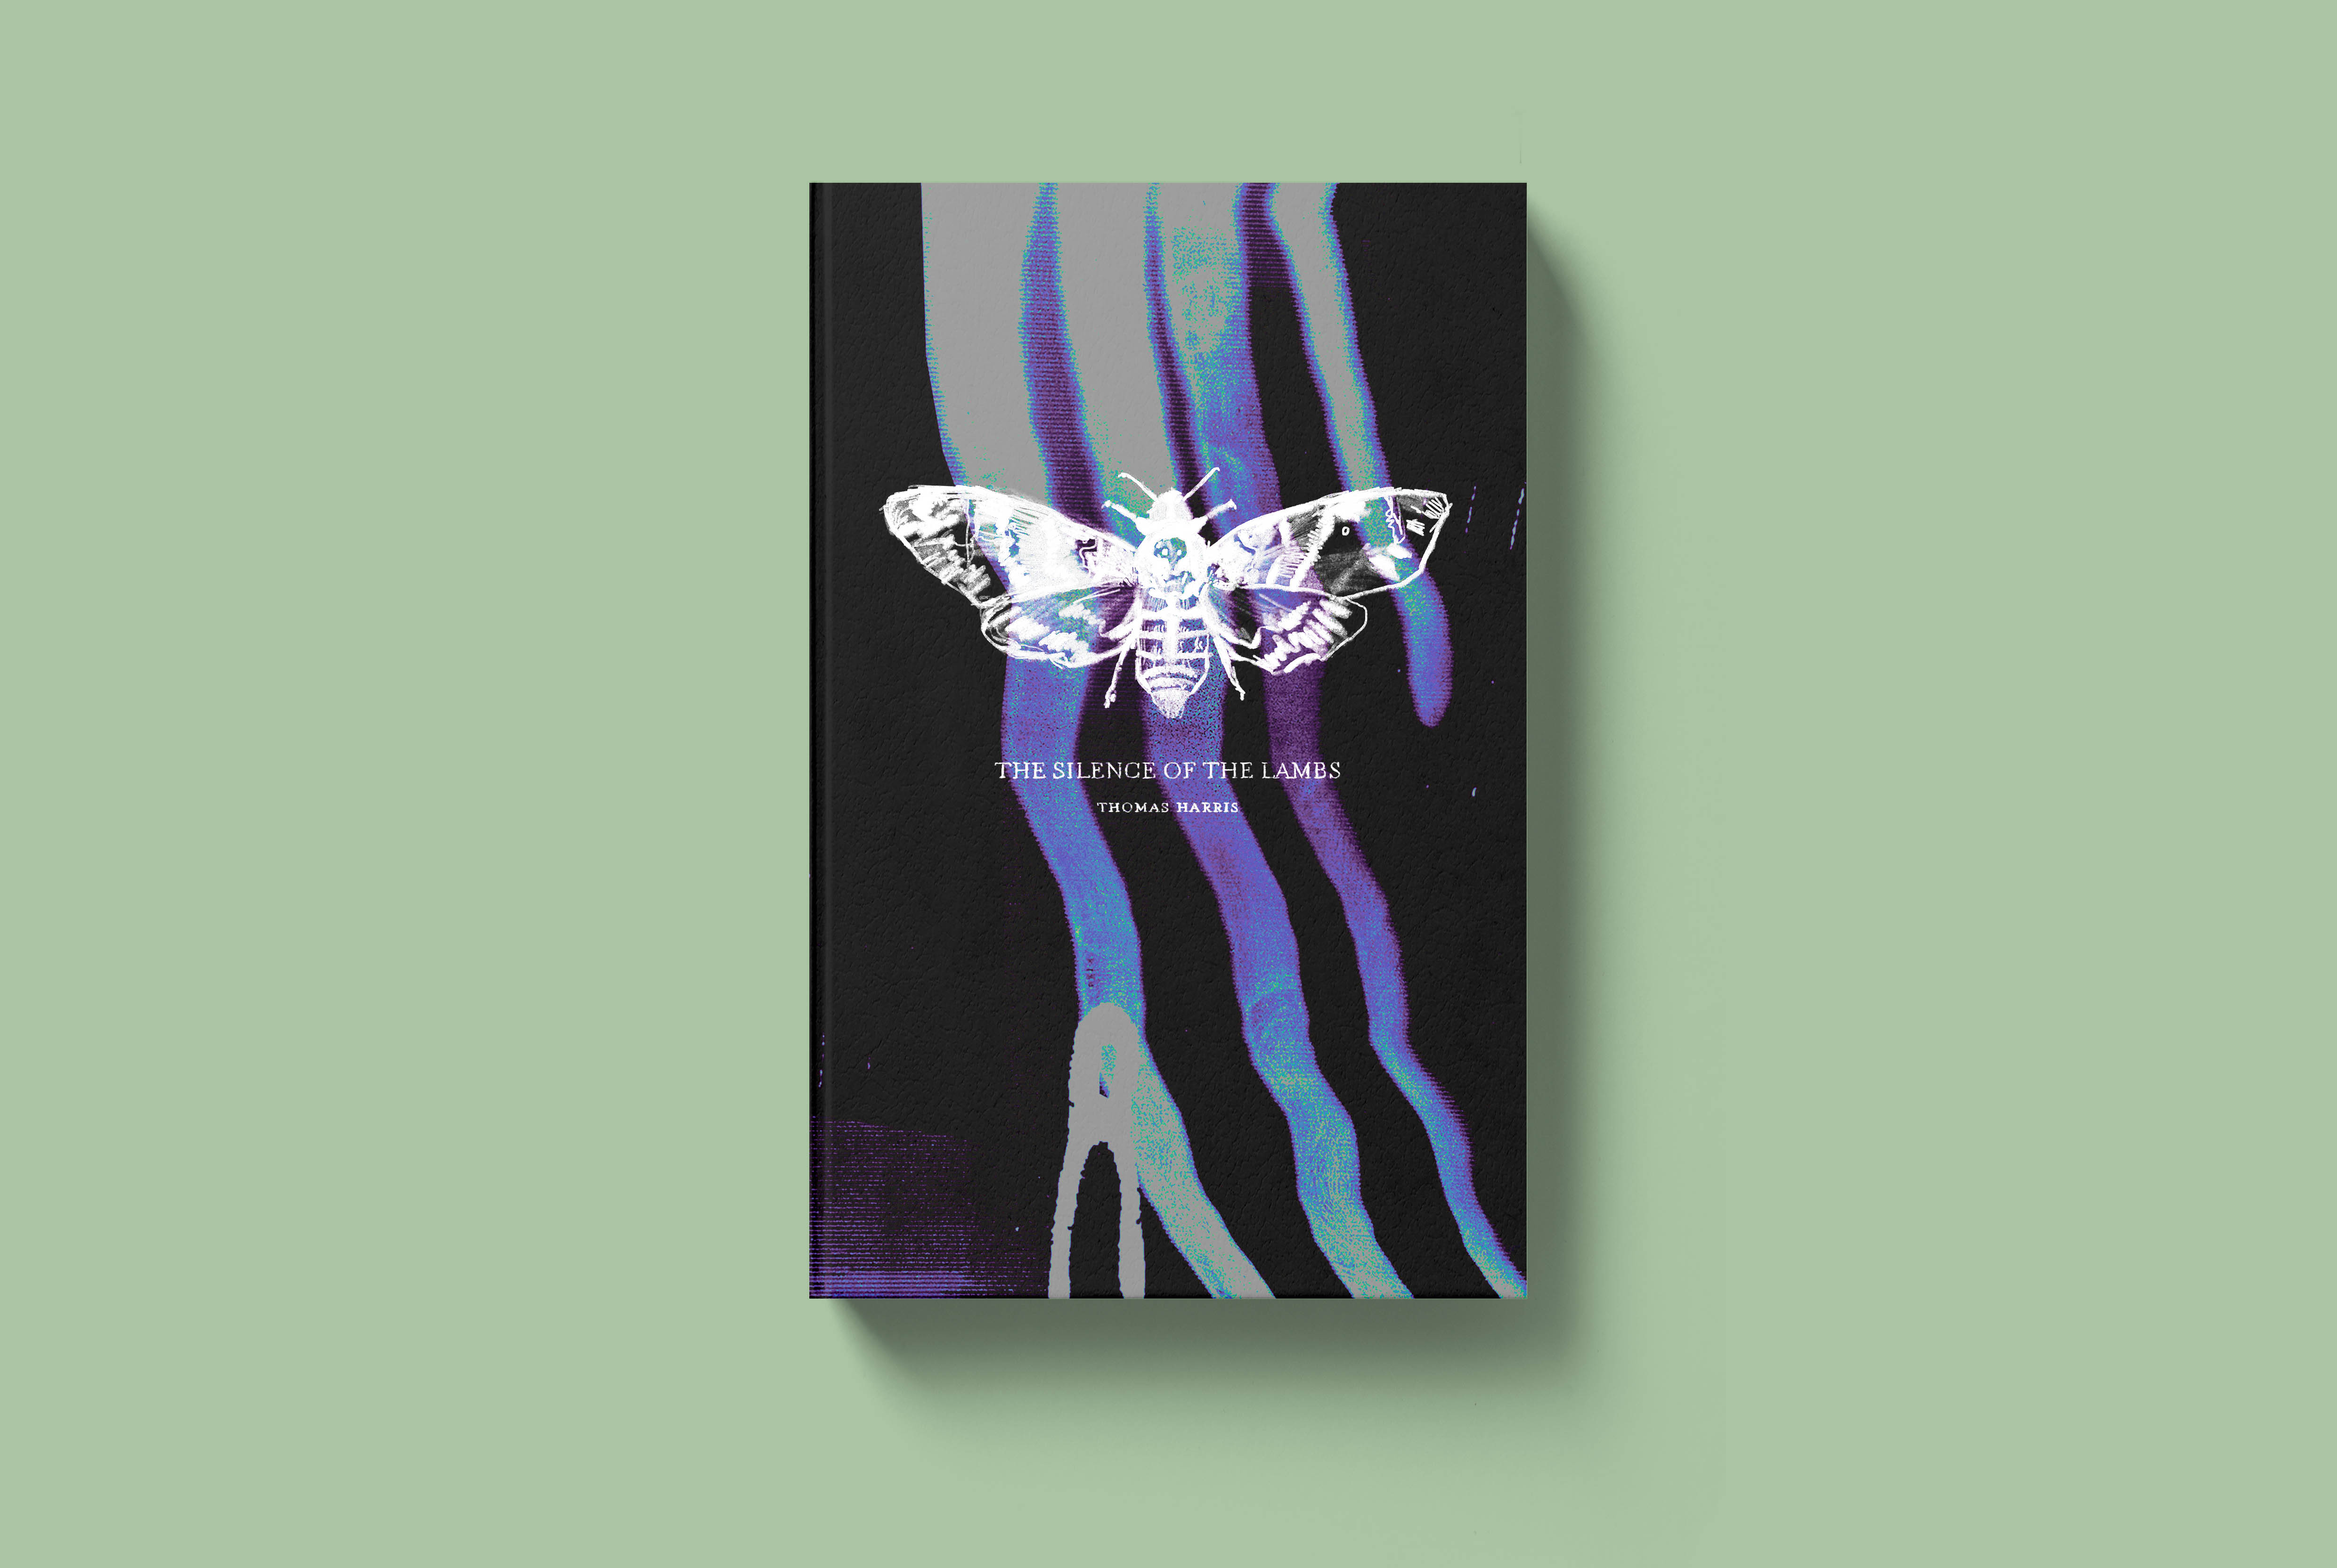 A digital mockup of a hardback book cover for The Silence of the Lambs. The cover is black with elements of purple and blue, with a white hand-drawn death's head hawk moth in the centre.